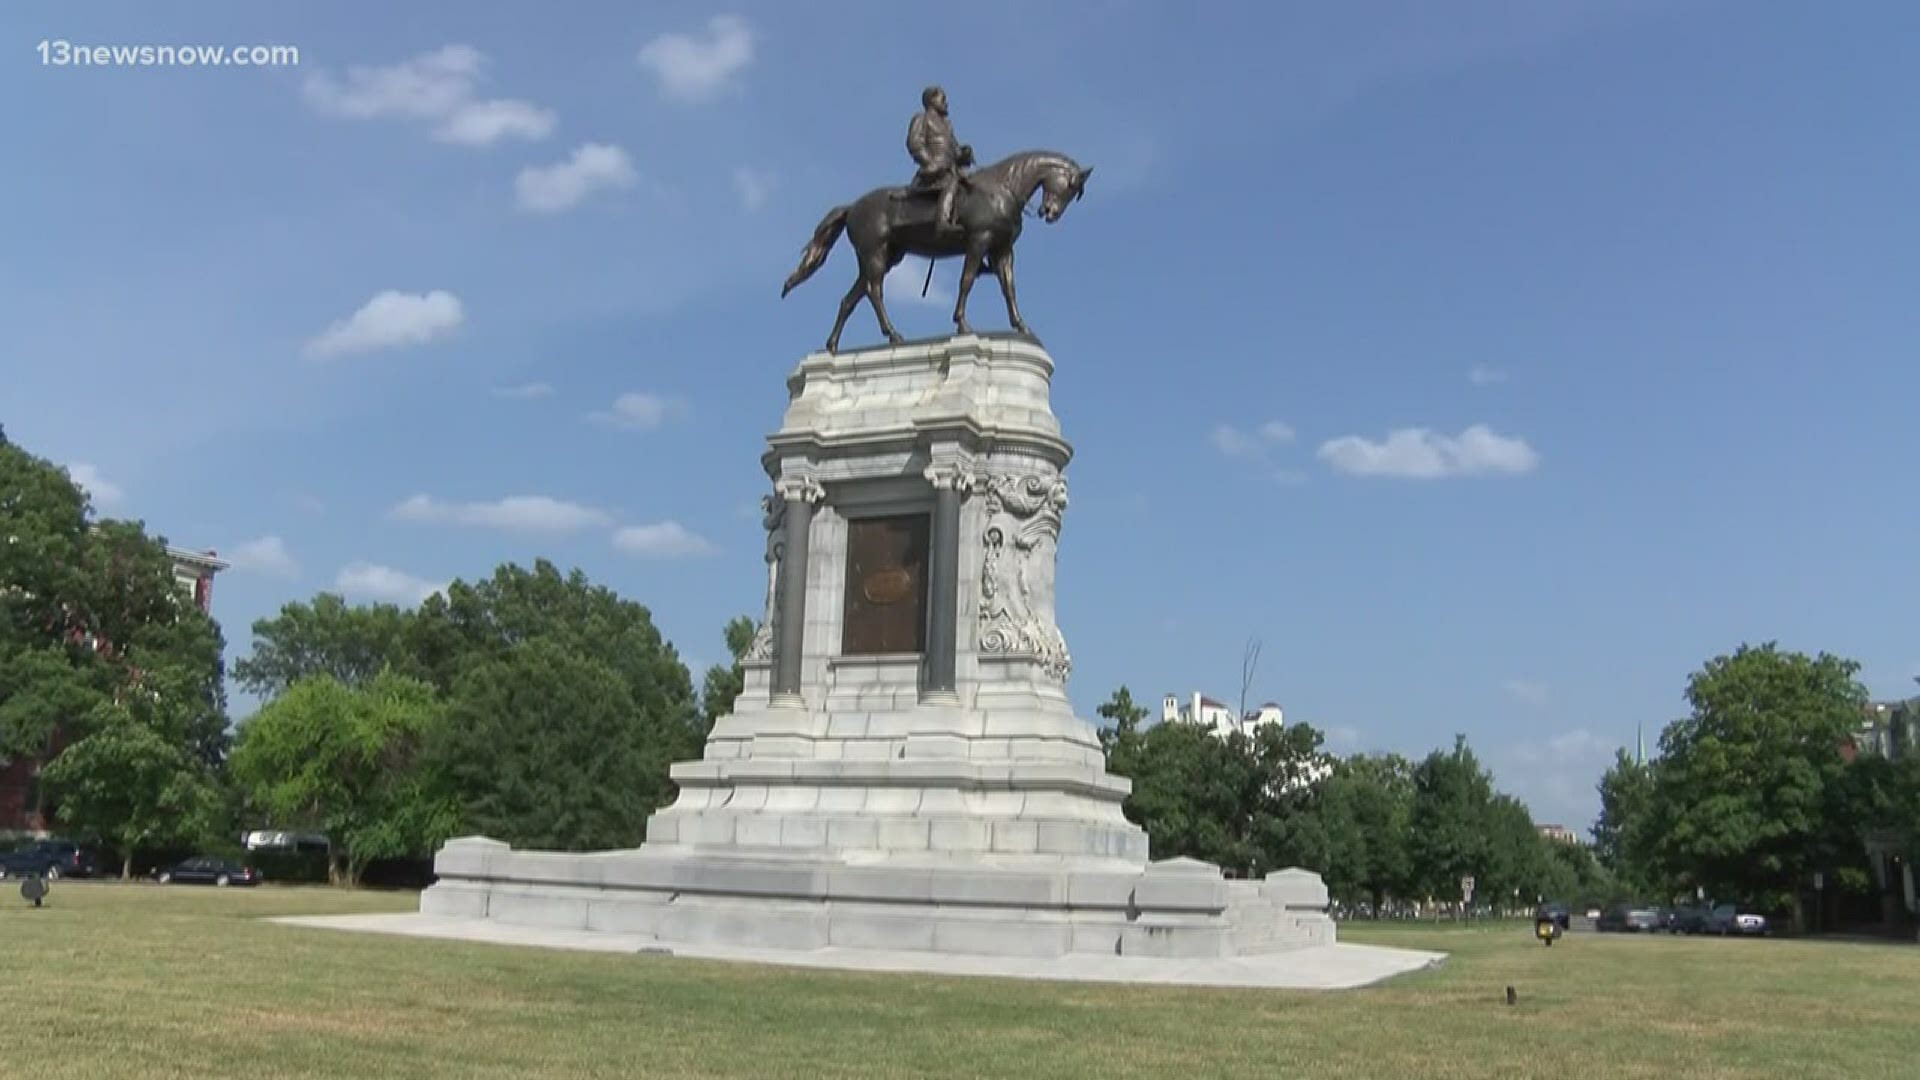 On June 4, 2020, Governor Ralph Northam said the Gen. Robert E. Lee statue on Monument Avenue in Richmond, Virgina. would be removed "as soon as possible."